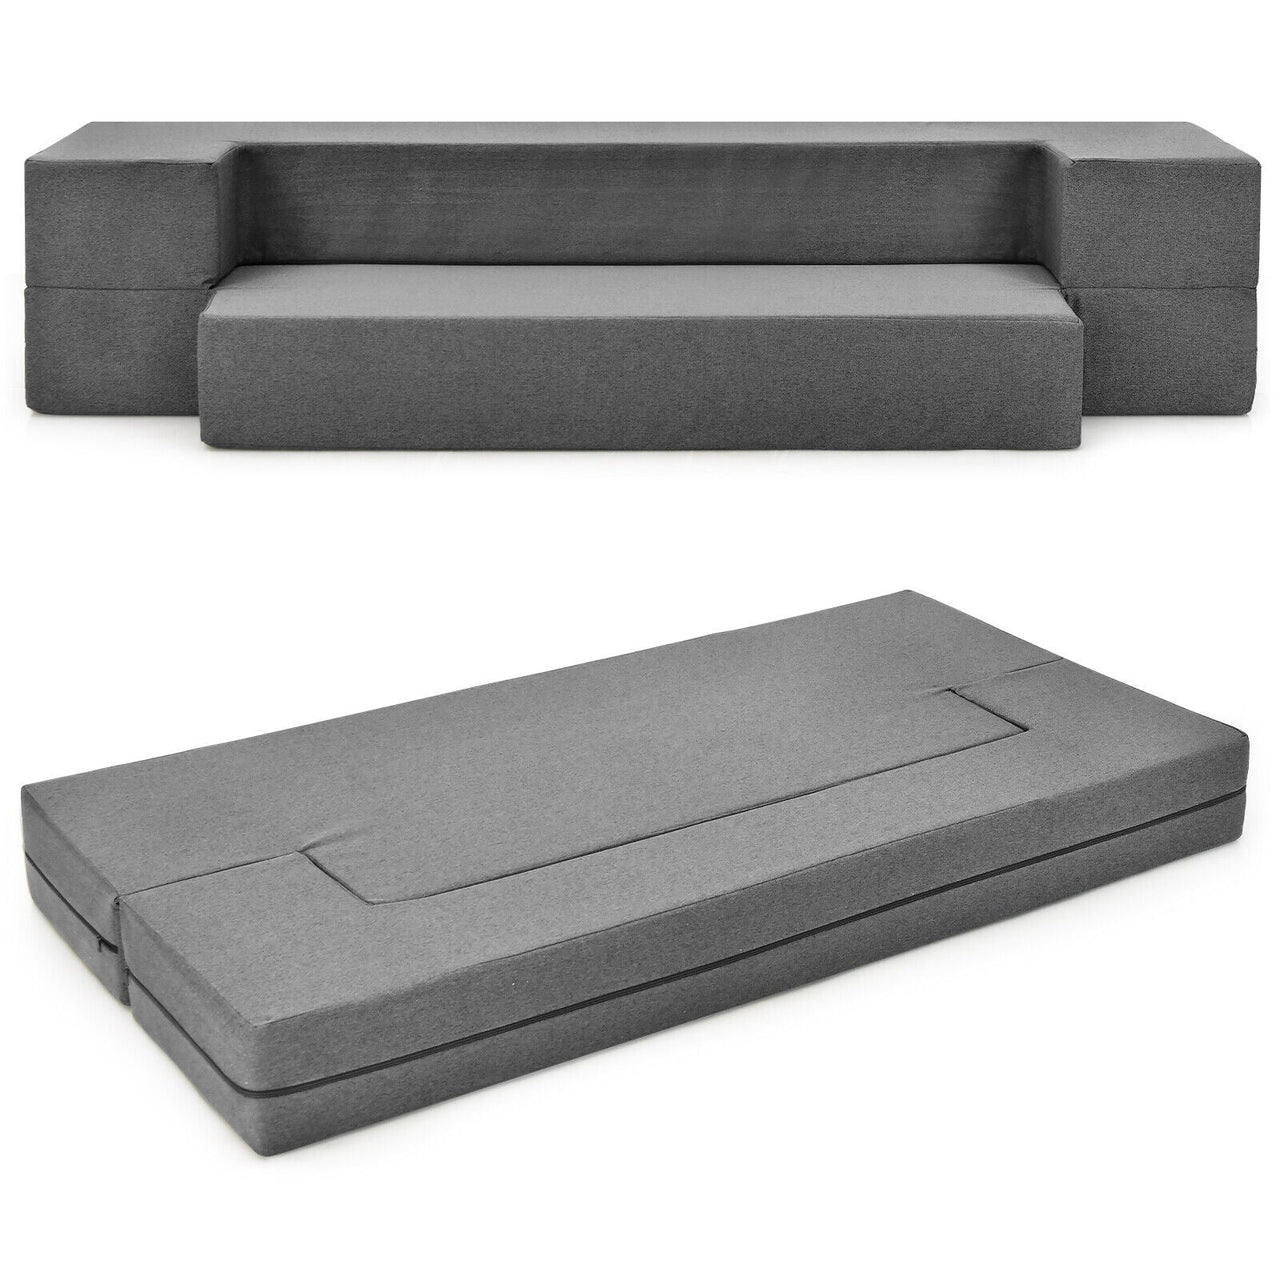 8 Inch Convertible Folding Sofa Bed with Washable Cover